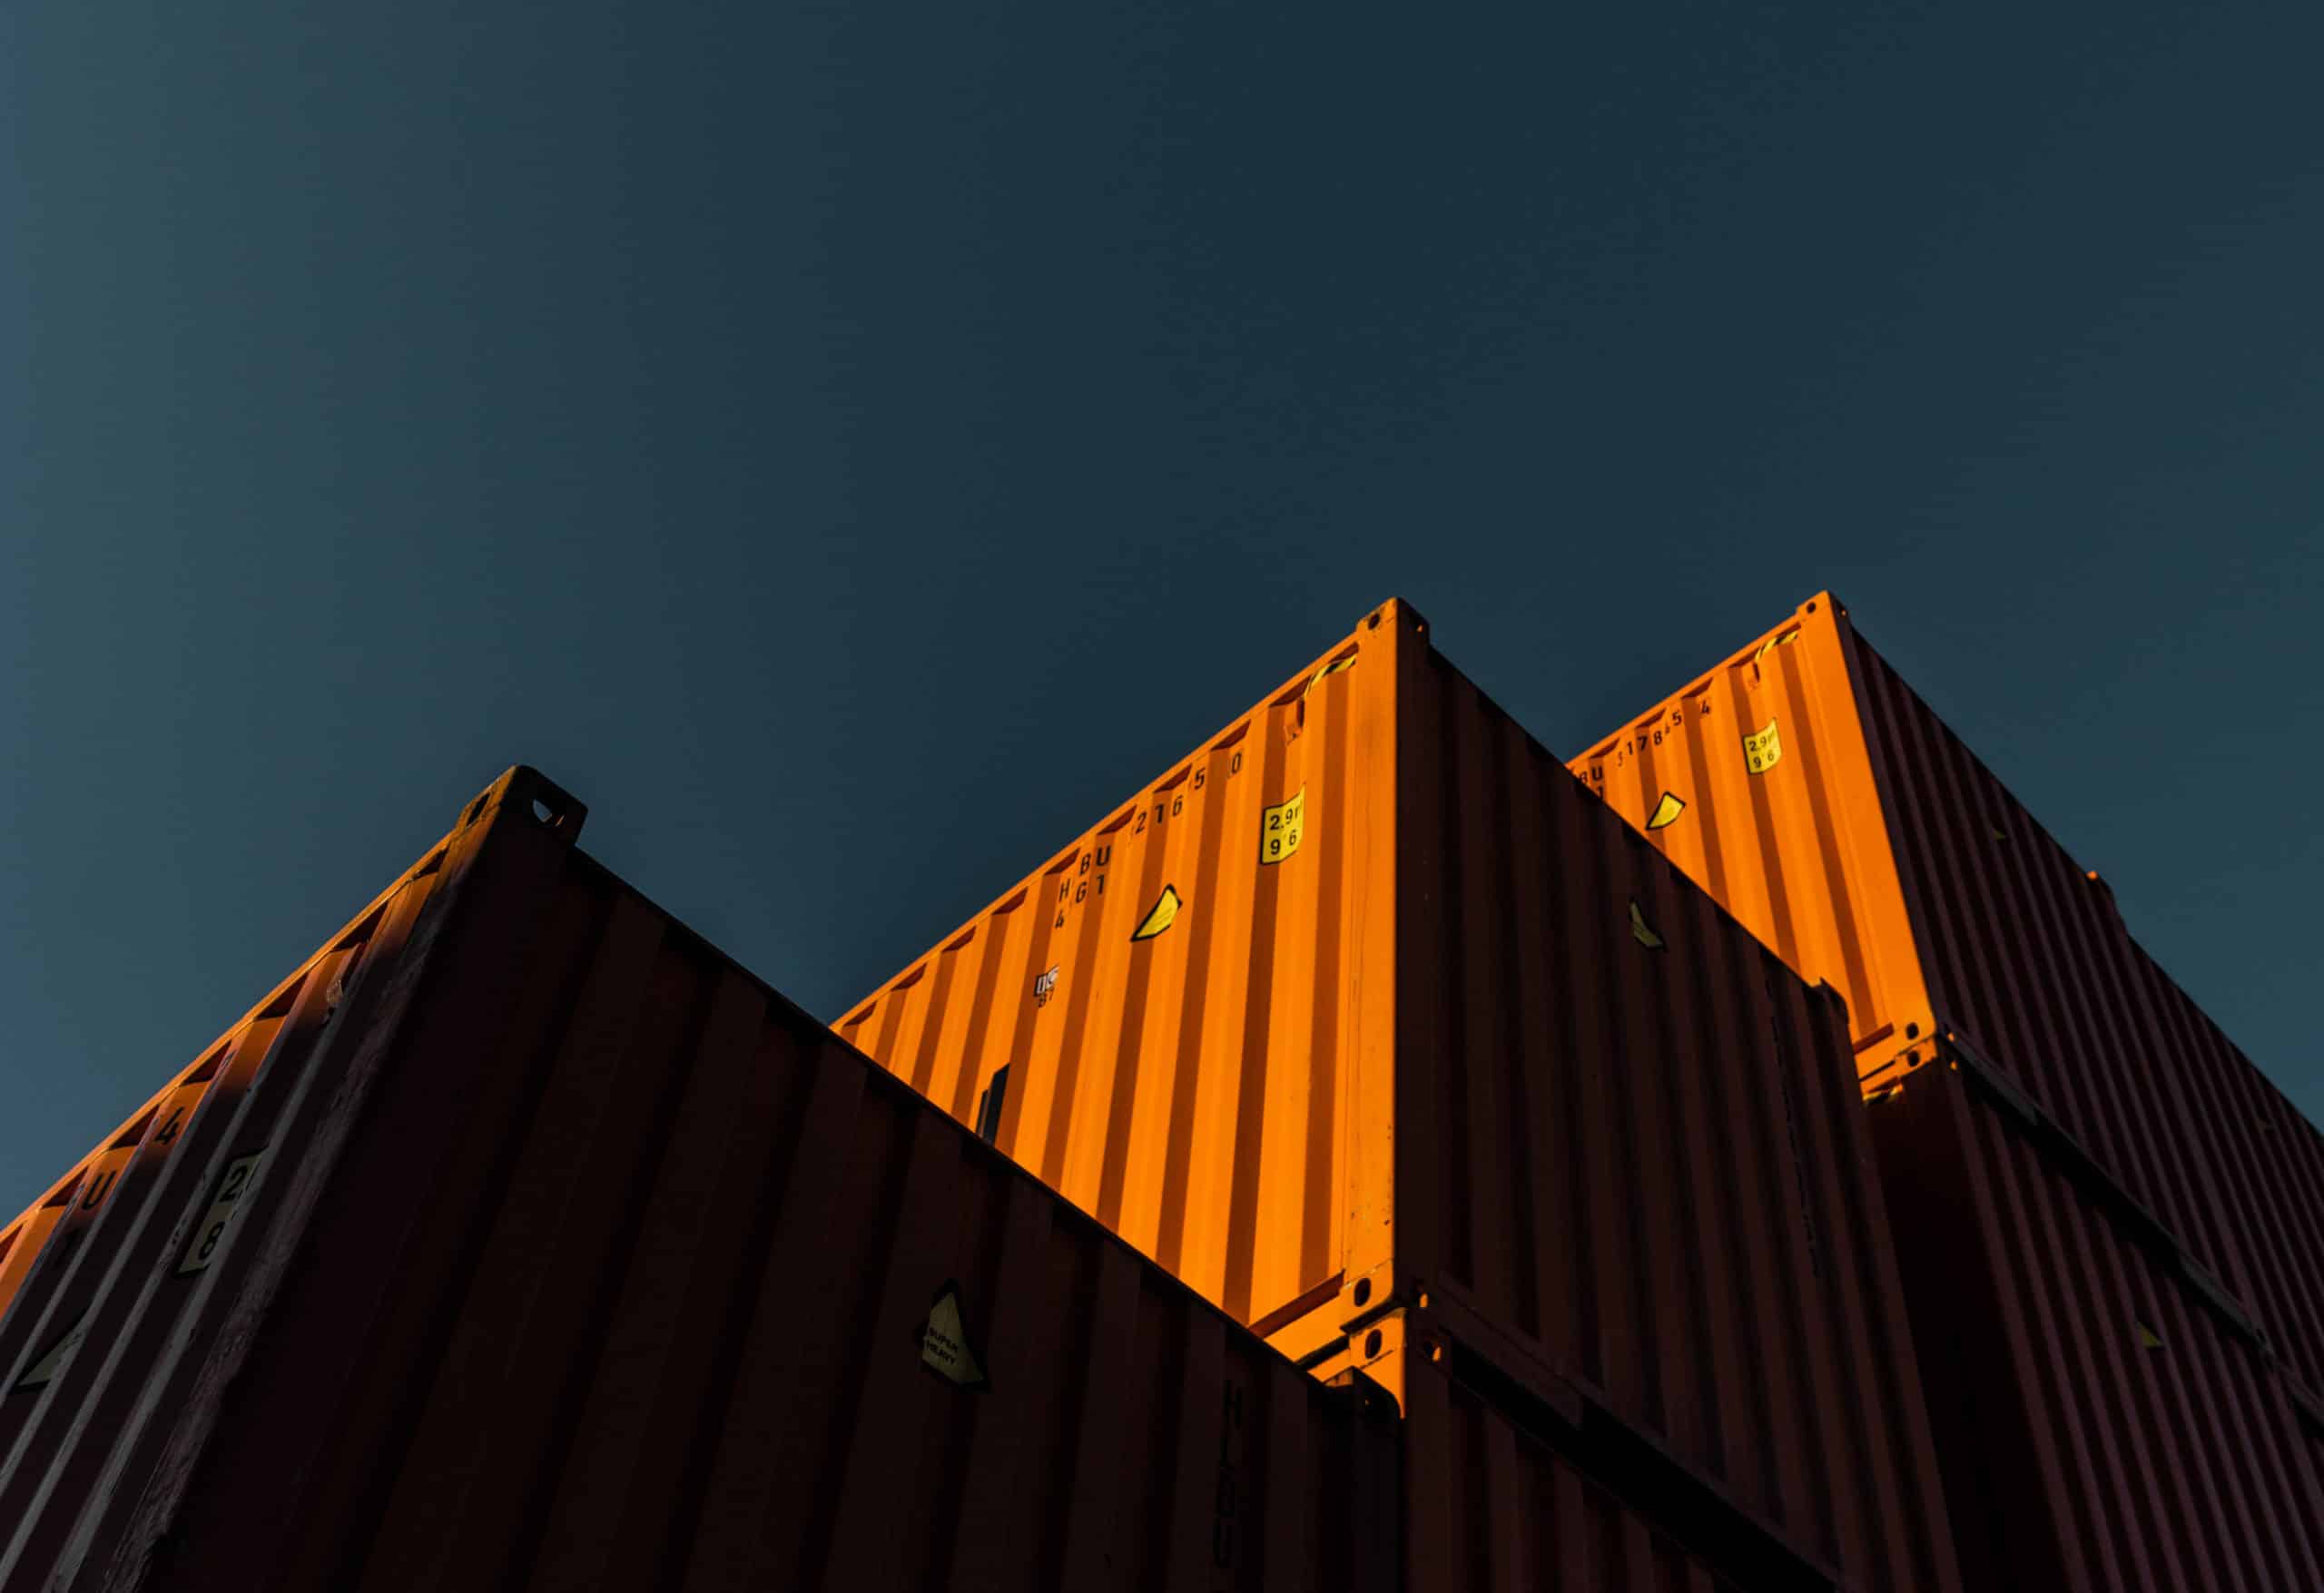 Orange containers stacked.